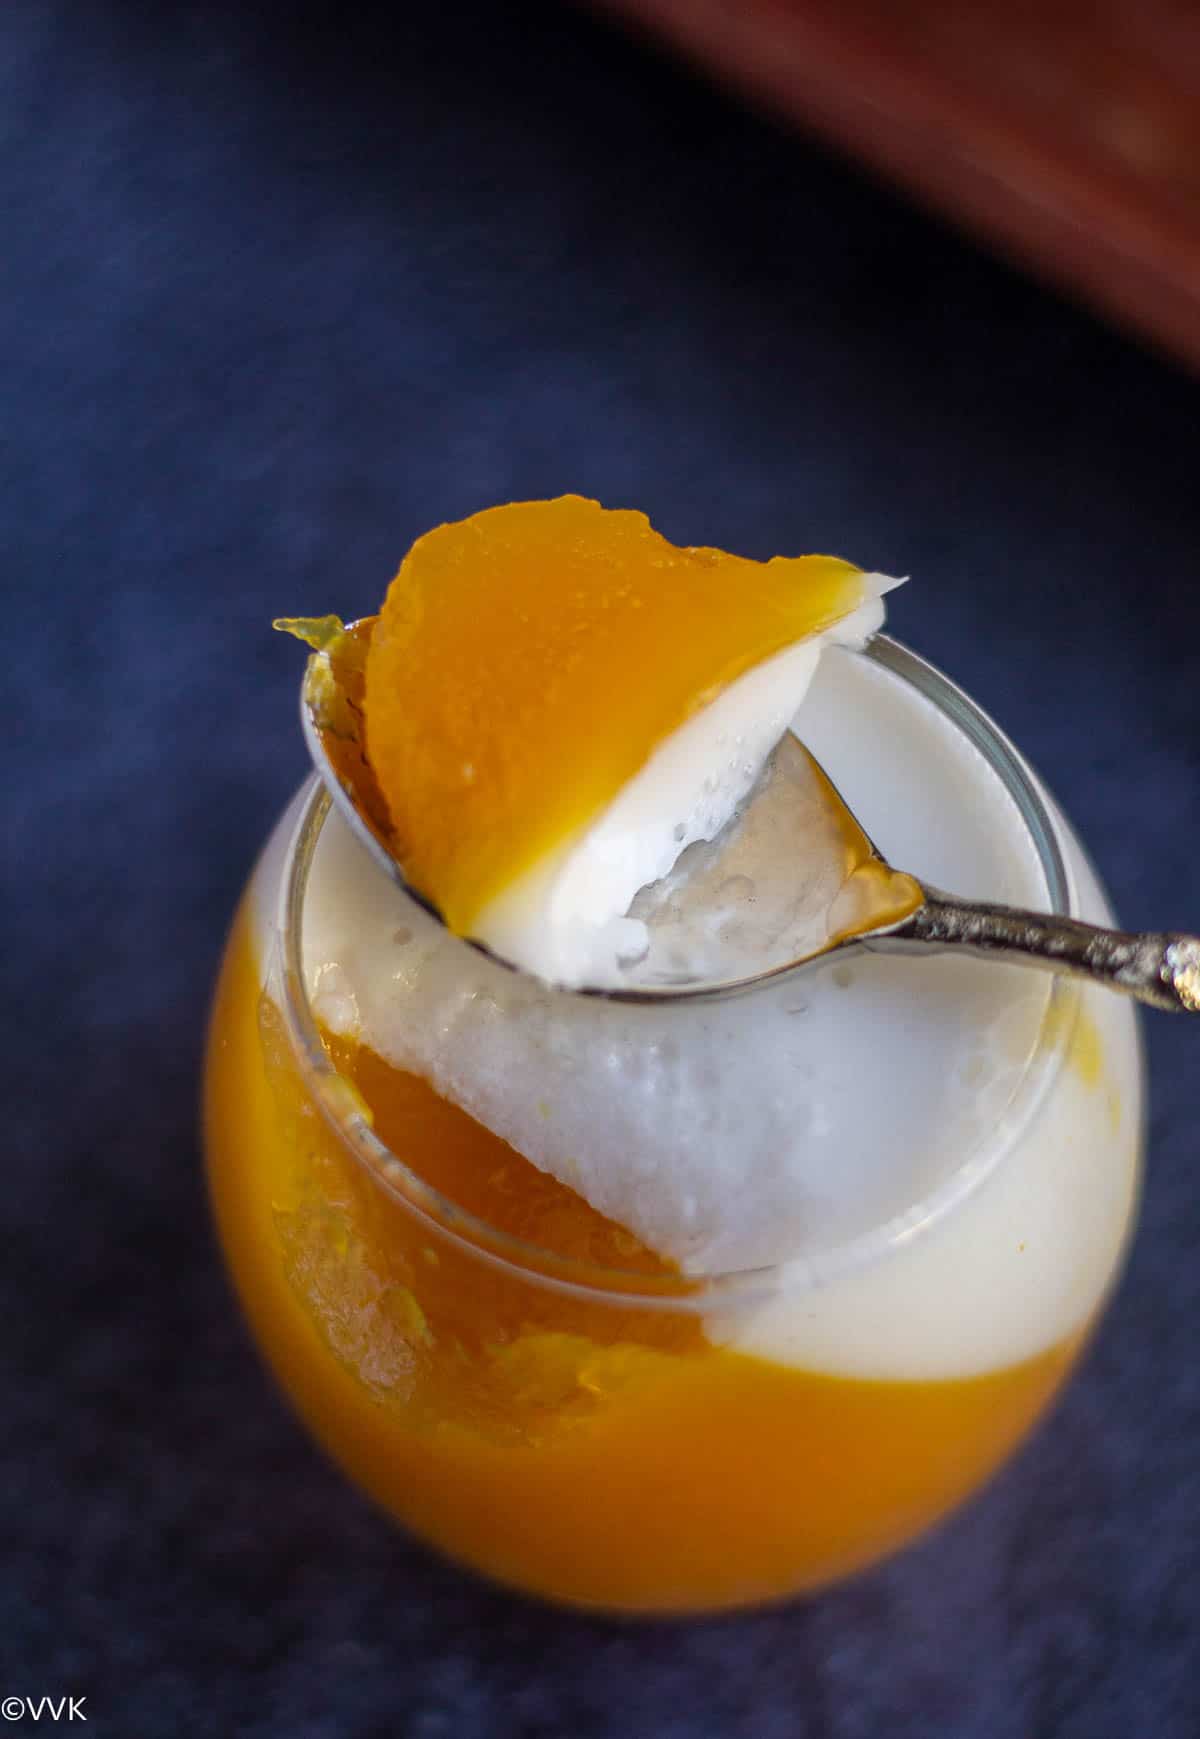 a spoon full of mango jelly placed on top of the dessert glass